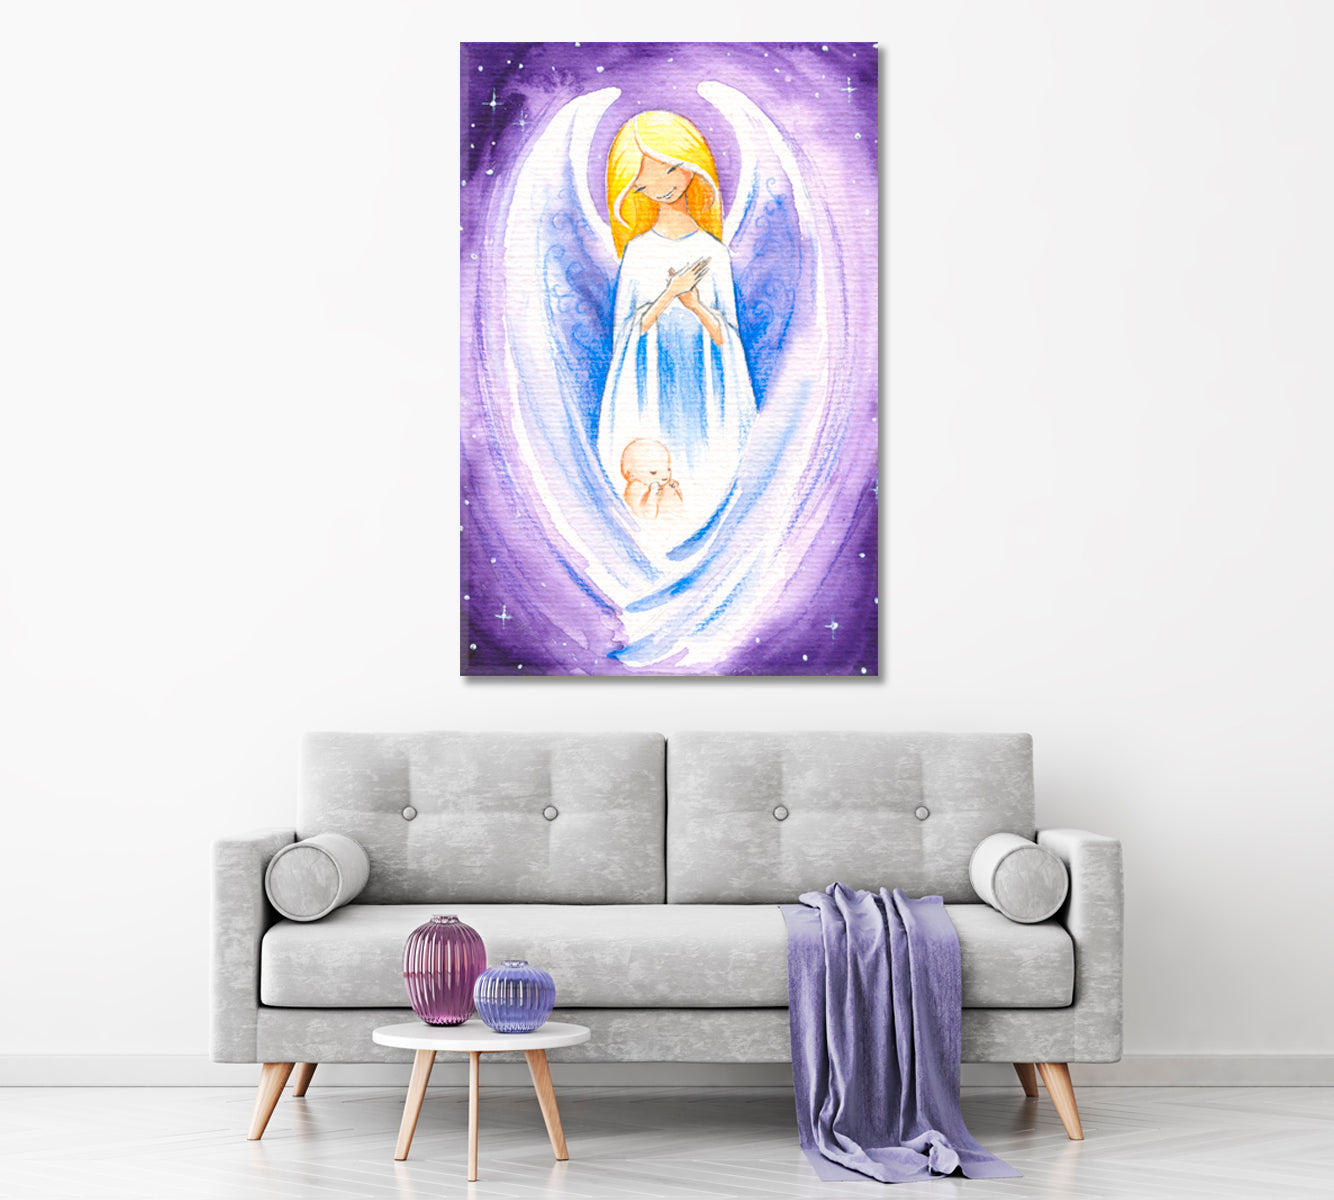 Guardian Angel Protects Child Canvas Print ArtLexy 1 Panel 16"x24" inches 